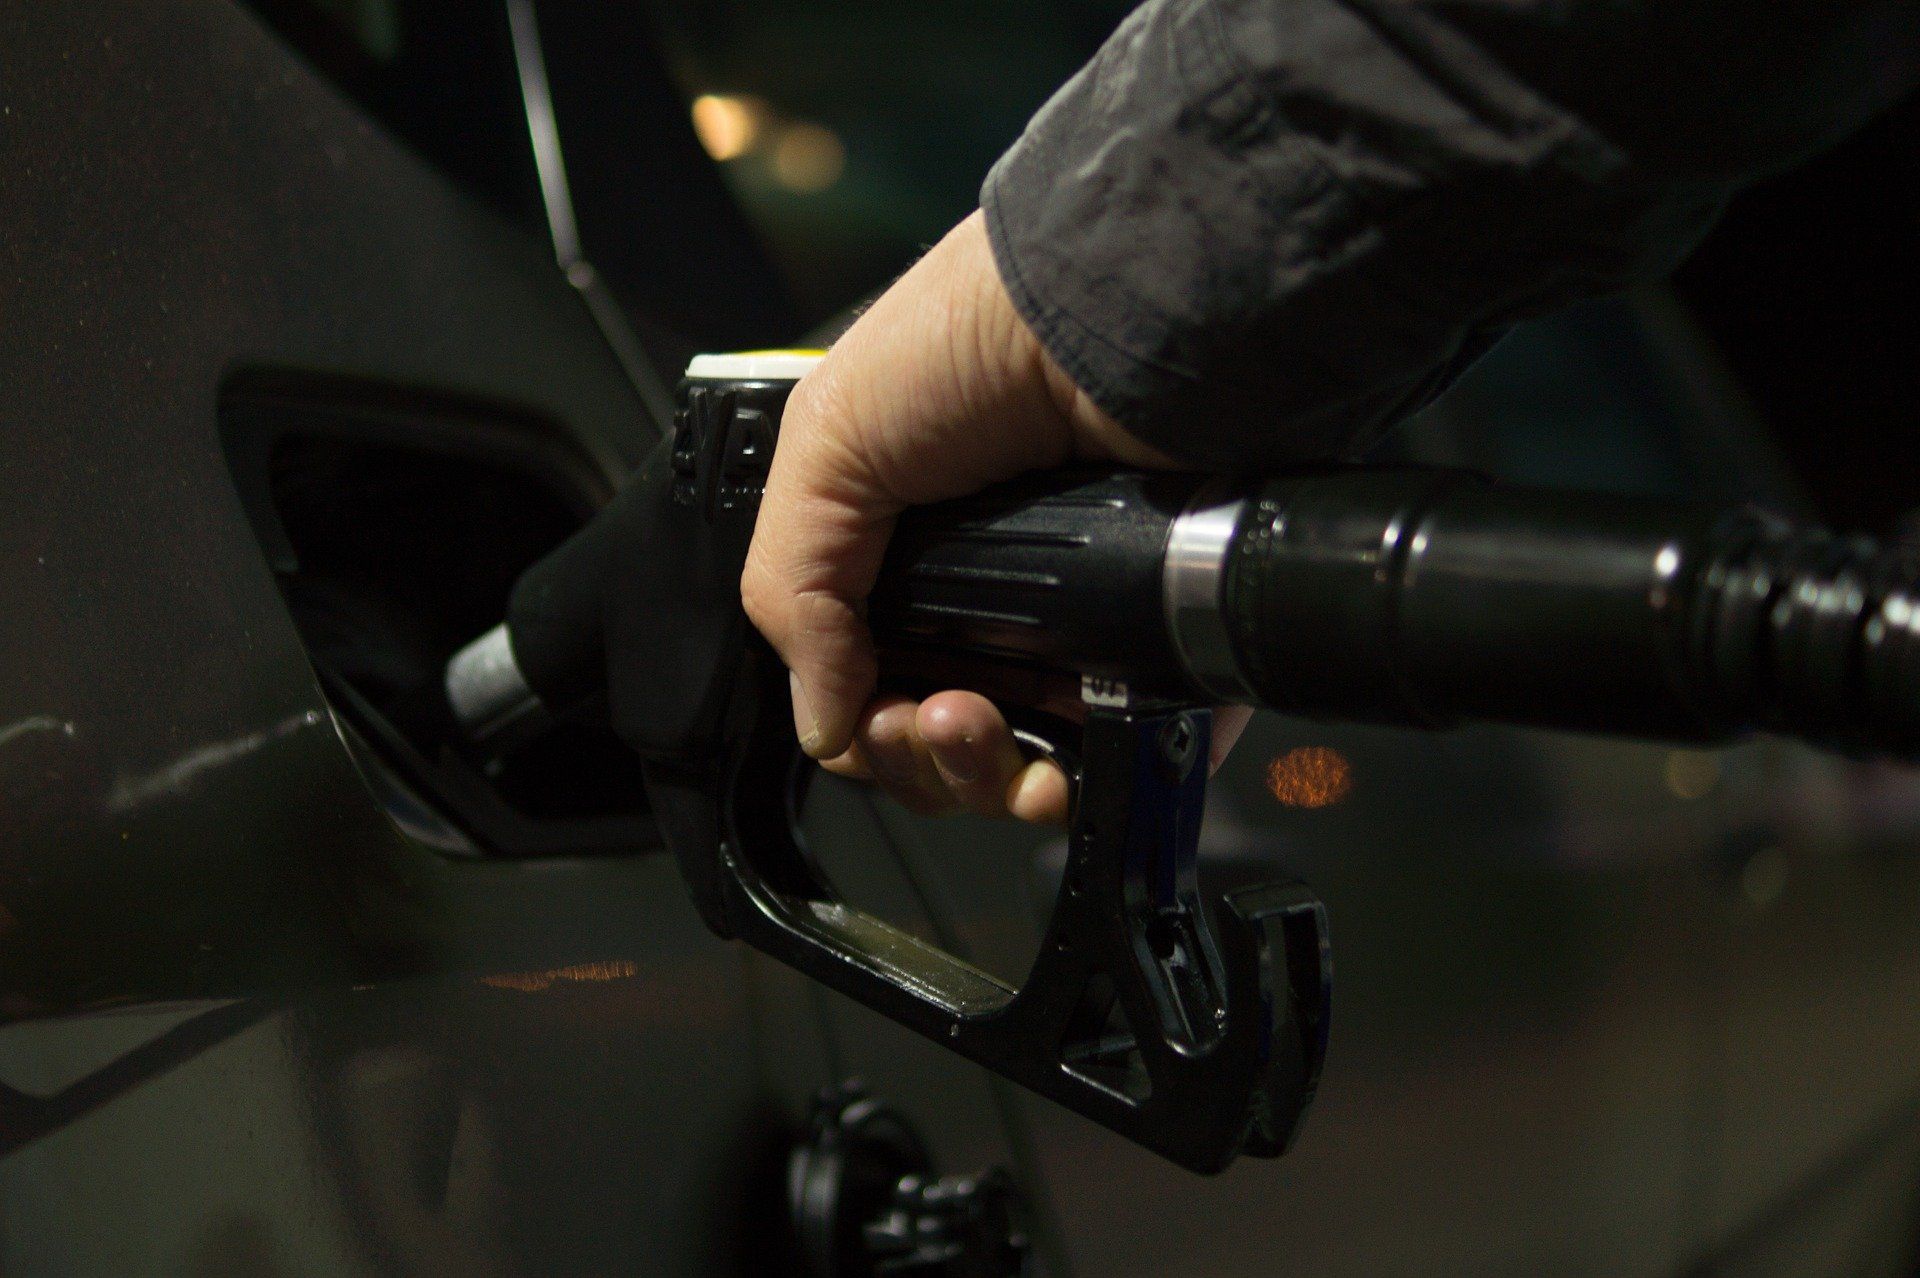 Fuel prices: Petrol priced at Rs 95.41, diesel Rs 86.67 in Delhi on January 21, 2022